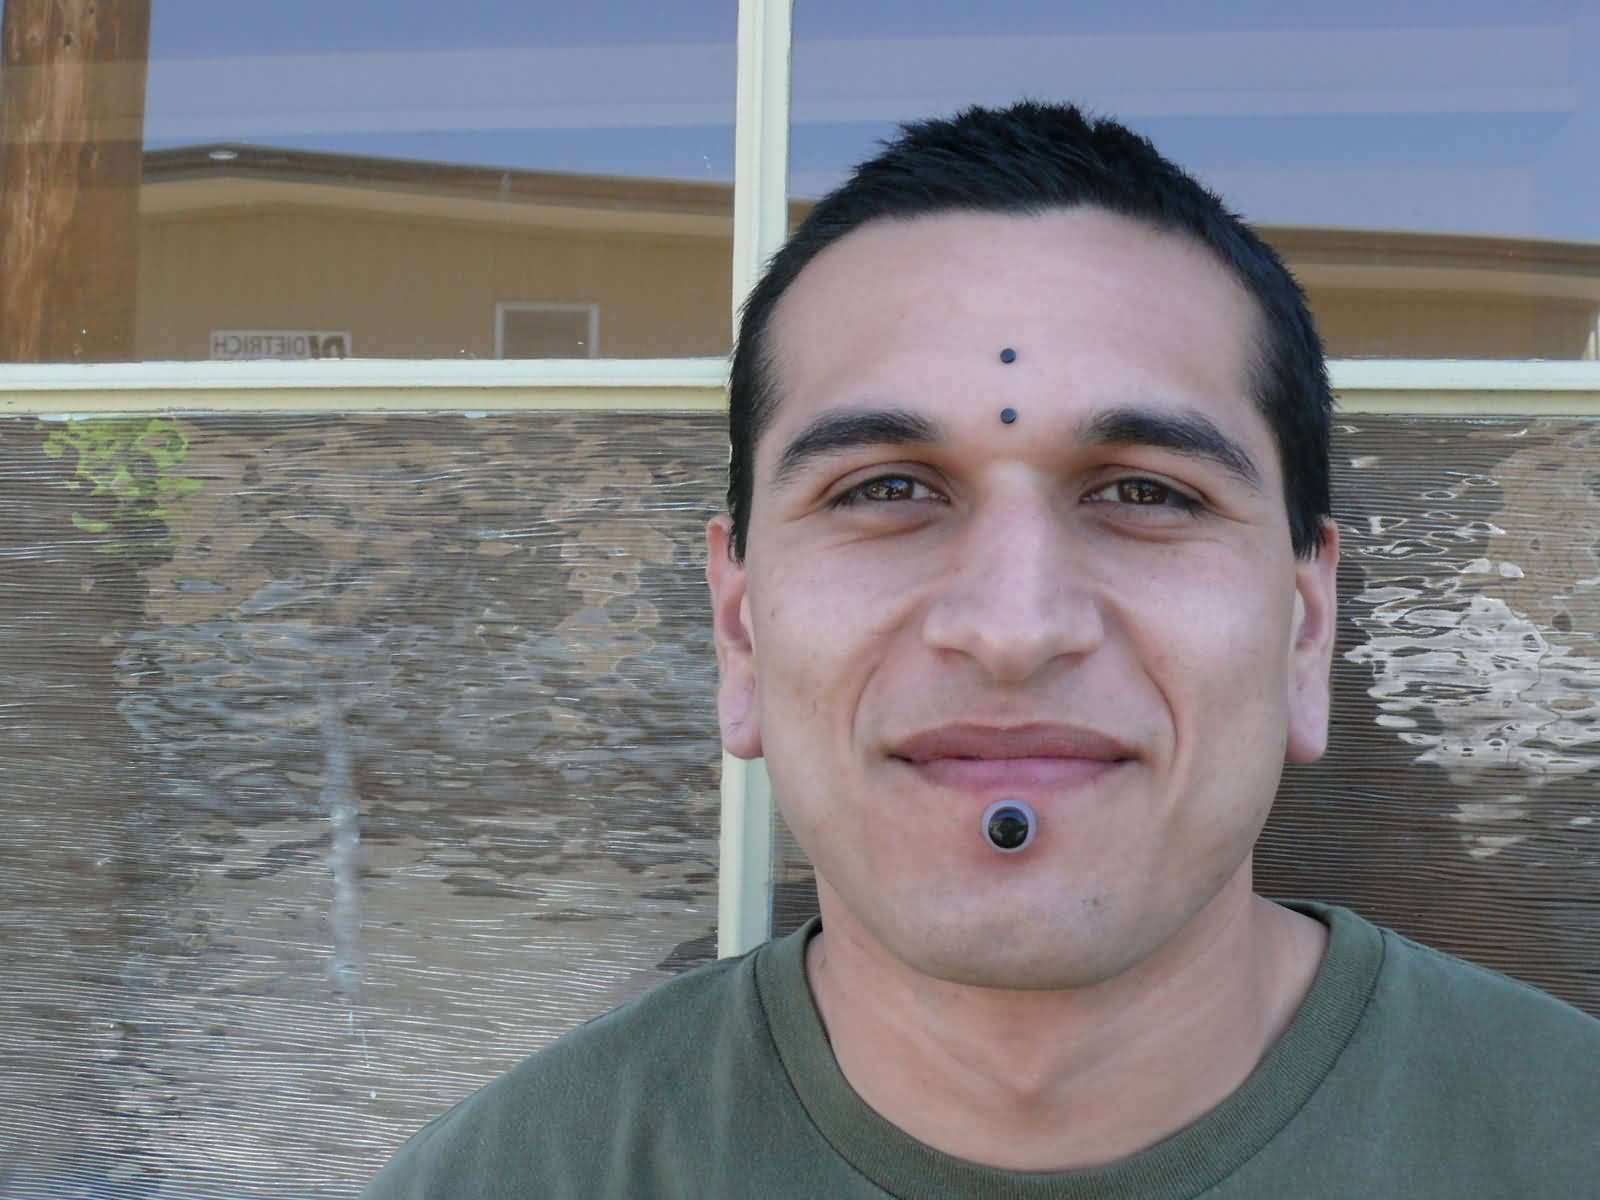 Labret And Third Eye Piercing For Men